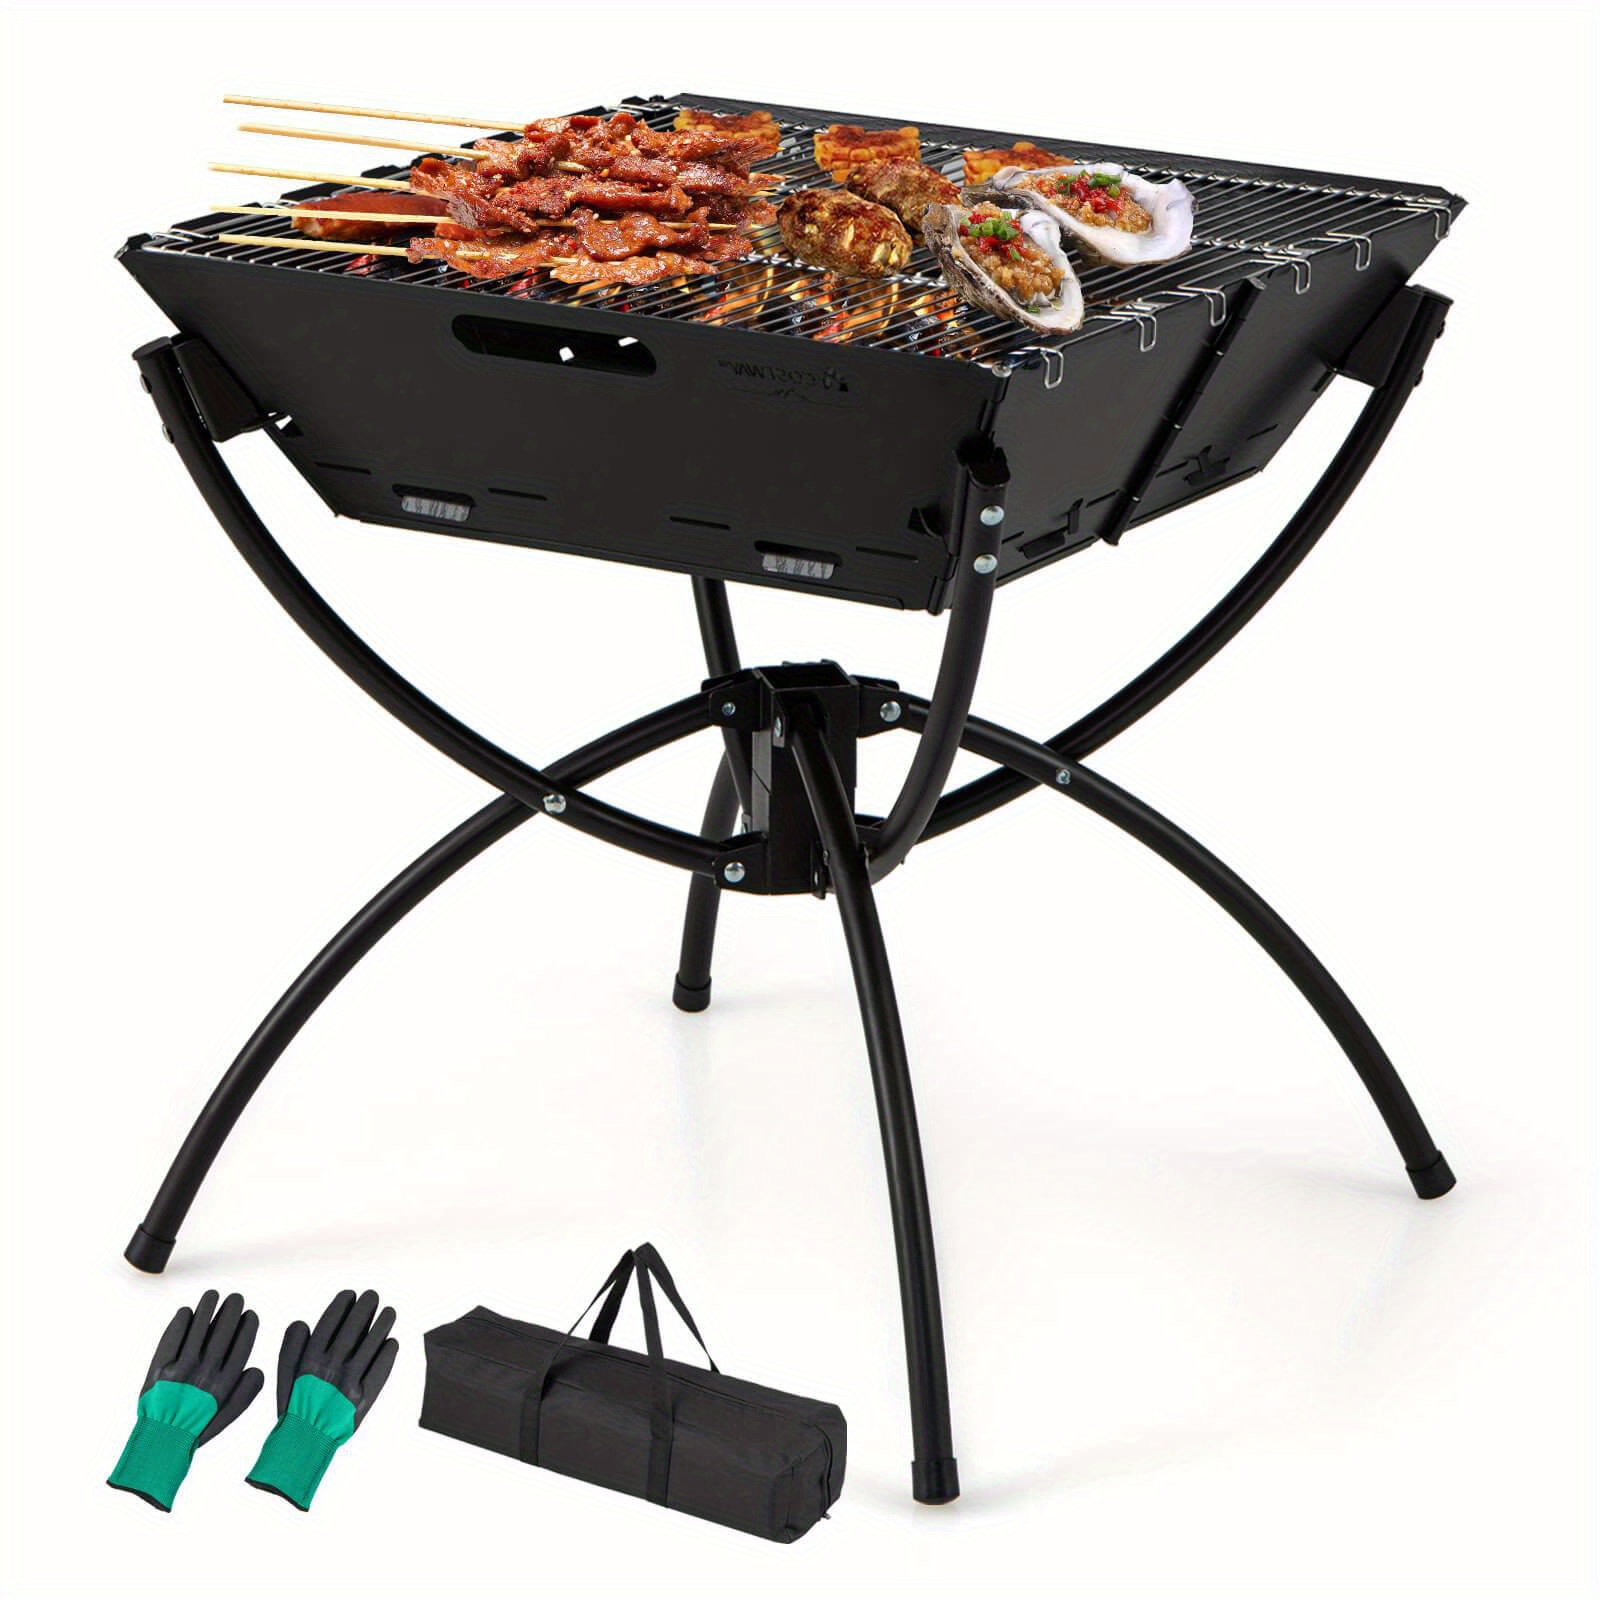 

Lifezeal 3-in-1 Portable Charcoal Grill Folding Camping Fire Pit W/ Carrying Bag & Gloves